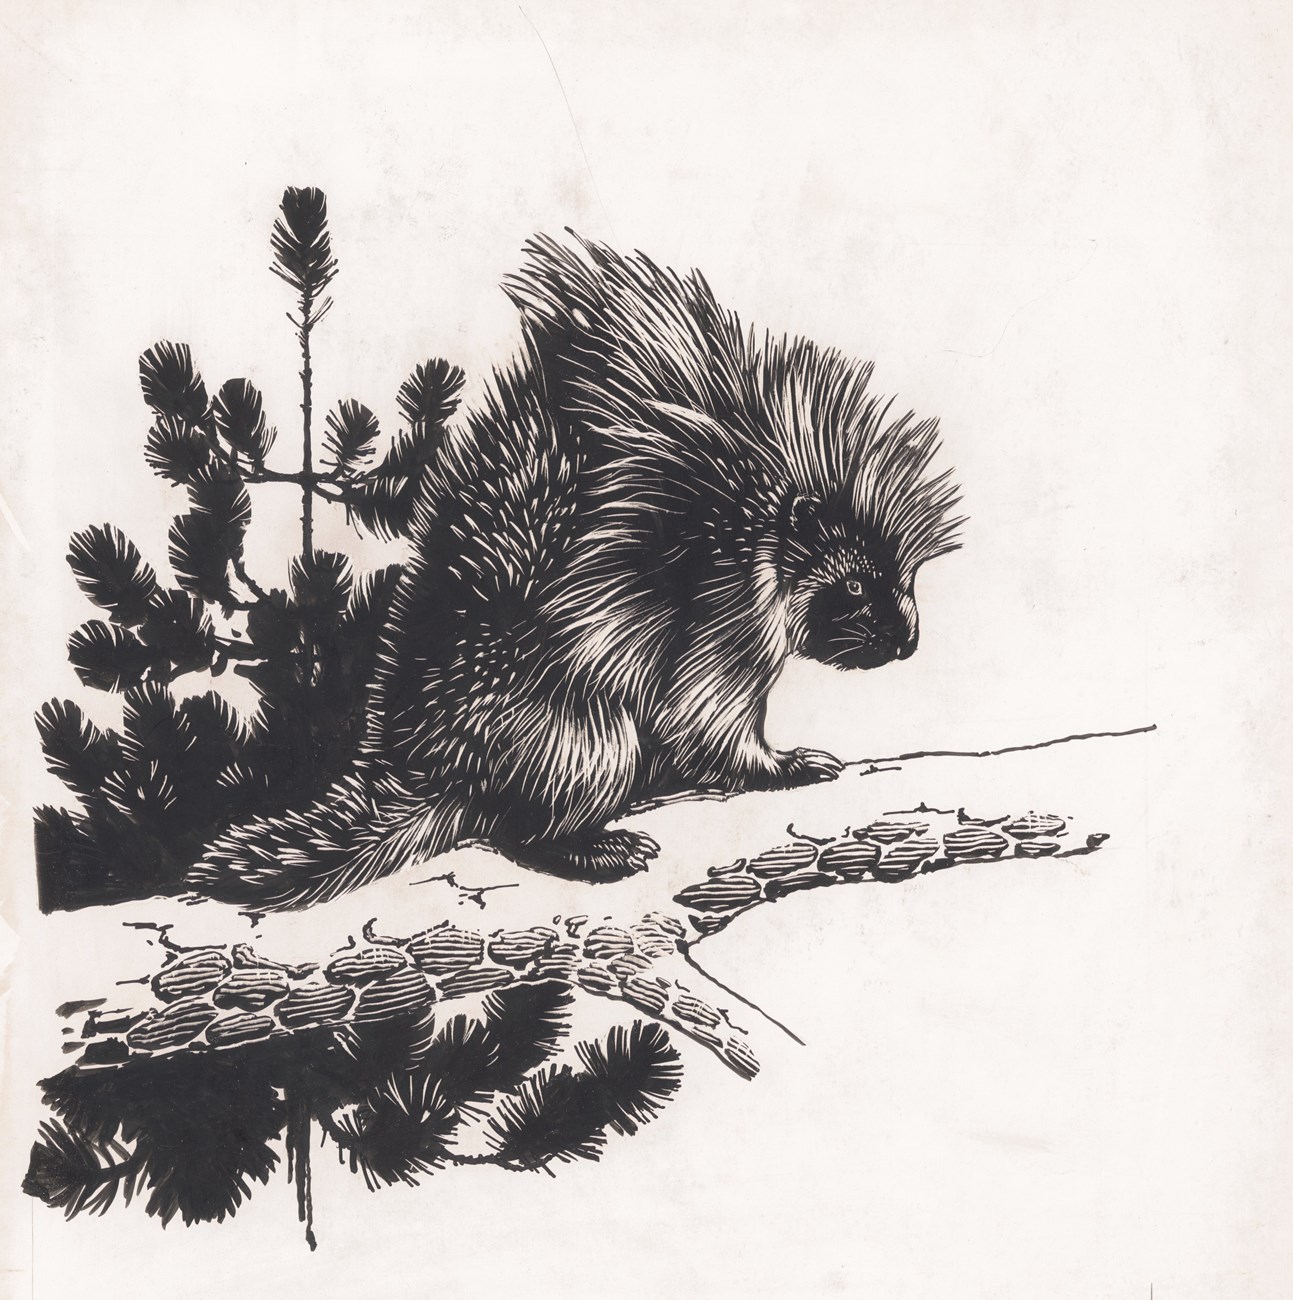 Pen-and-ink drawing of a porcupine on a tree branch